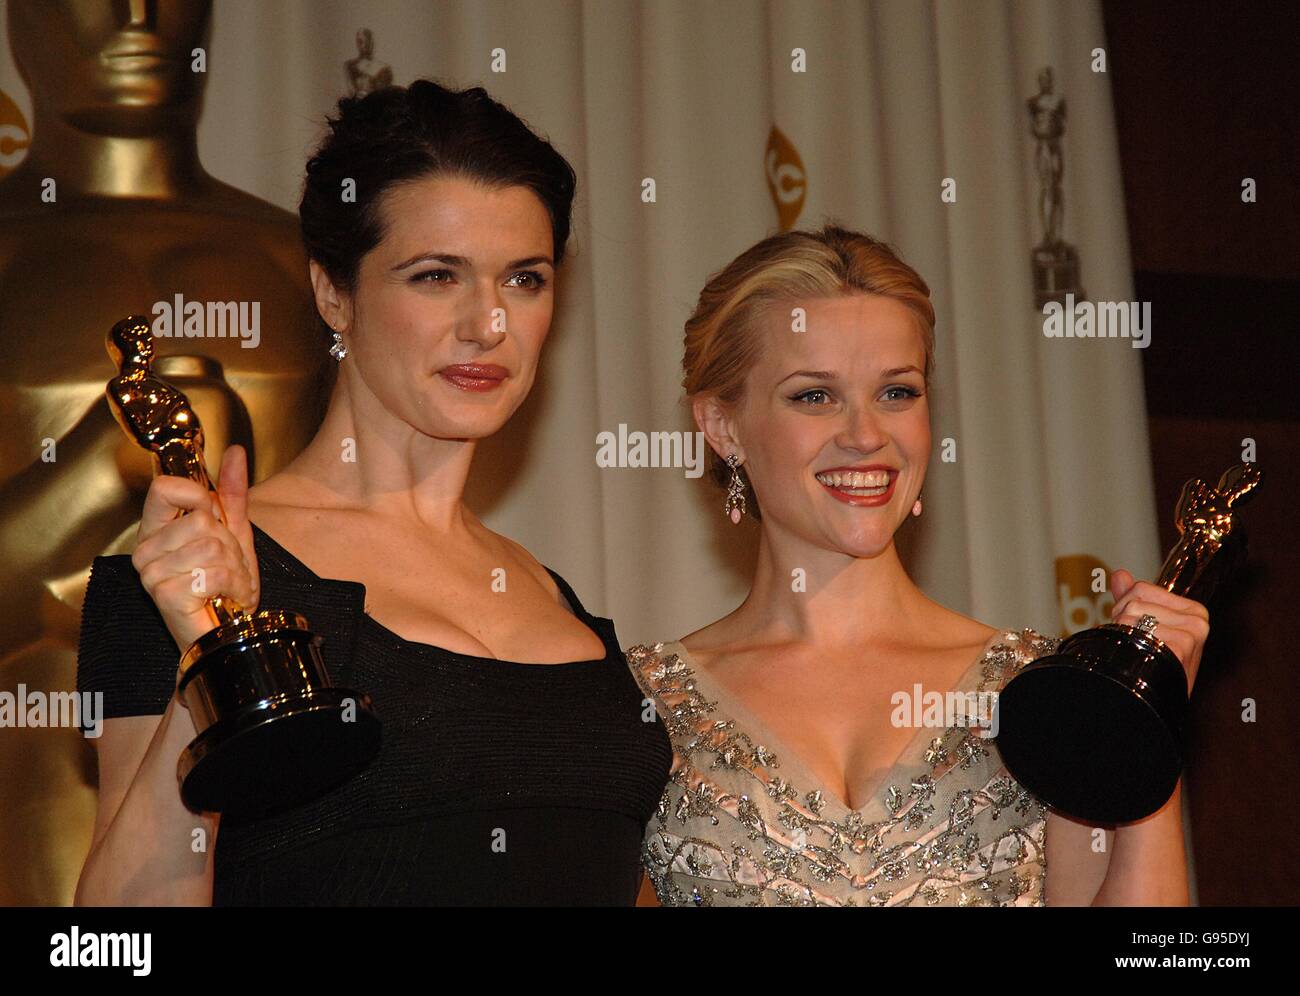 Reese Witherspoon with the Award for Best Actress in a Leading Role for Walk The Line (r) with Rachel Weisz and her award for Performance by an Actress in a Supporting Role for The Constant Gardener Stock Photo